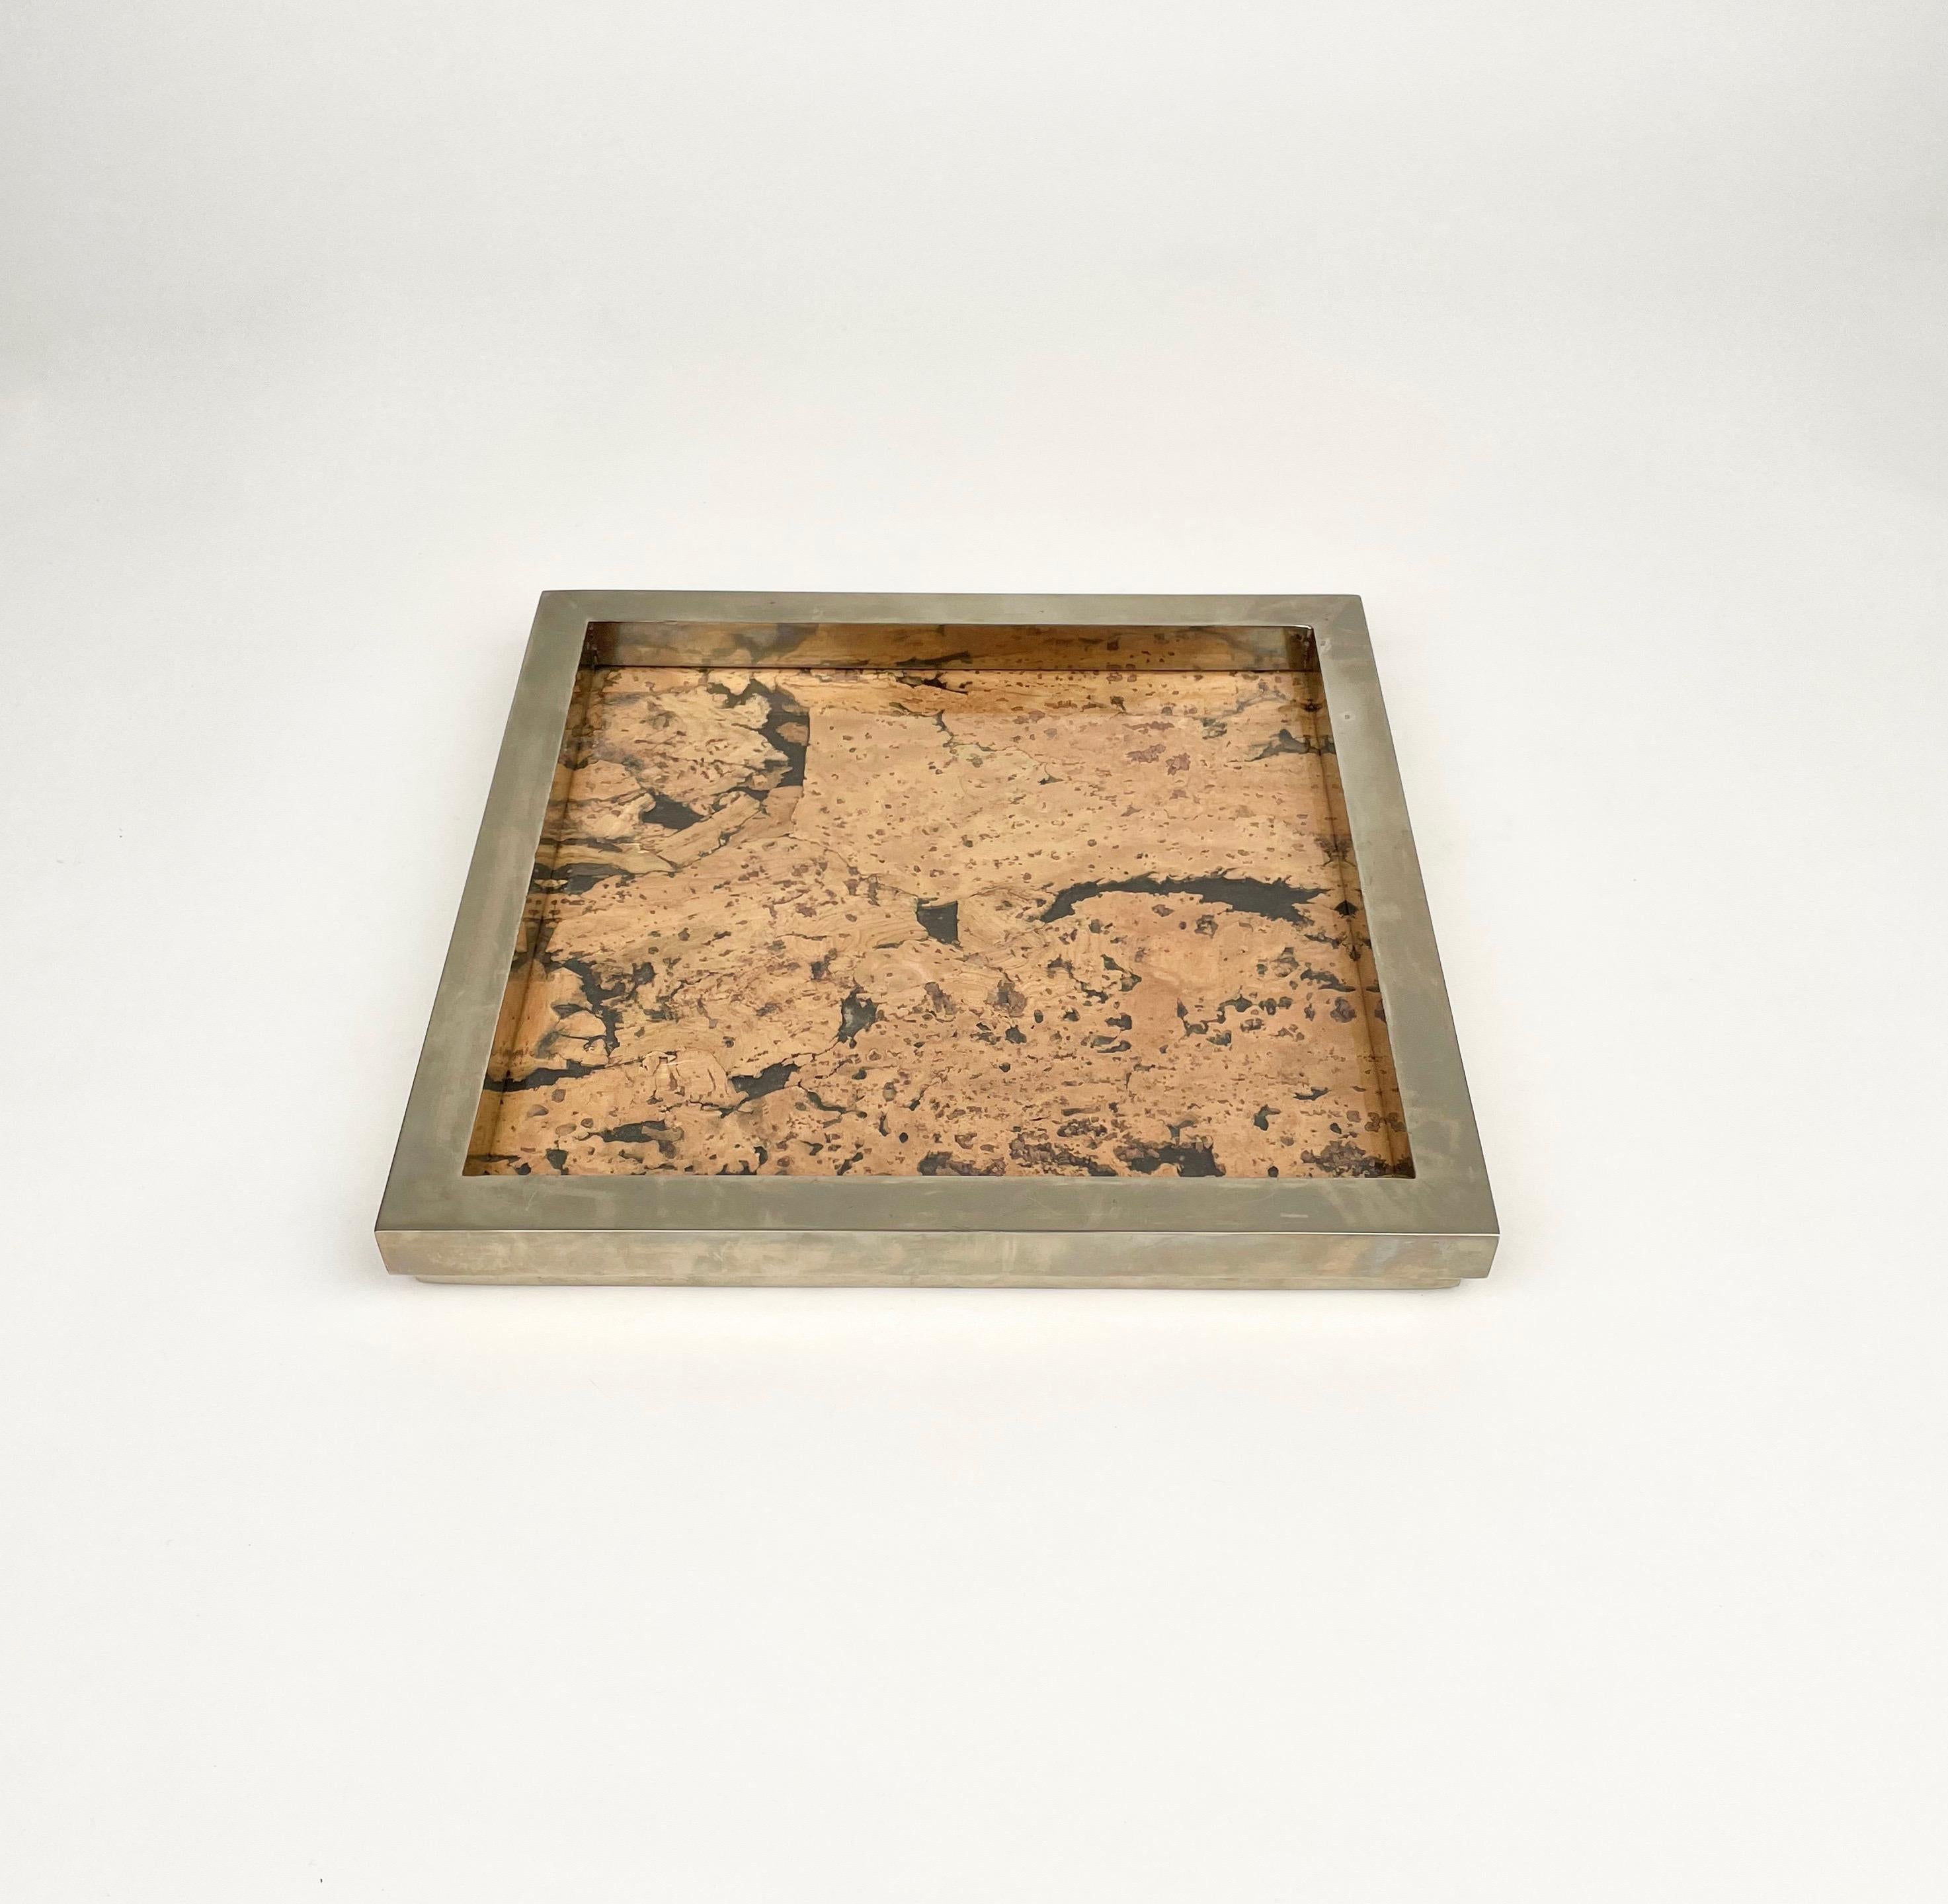 Marvelous Mid-Century square vide pocket emptier sundries tray in chrome, glass and cork. This amazing piece was designed in the style Christian Dior in the 1970s. The combination of materials is simply breathtaking, a magnificent chrome frame